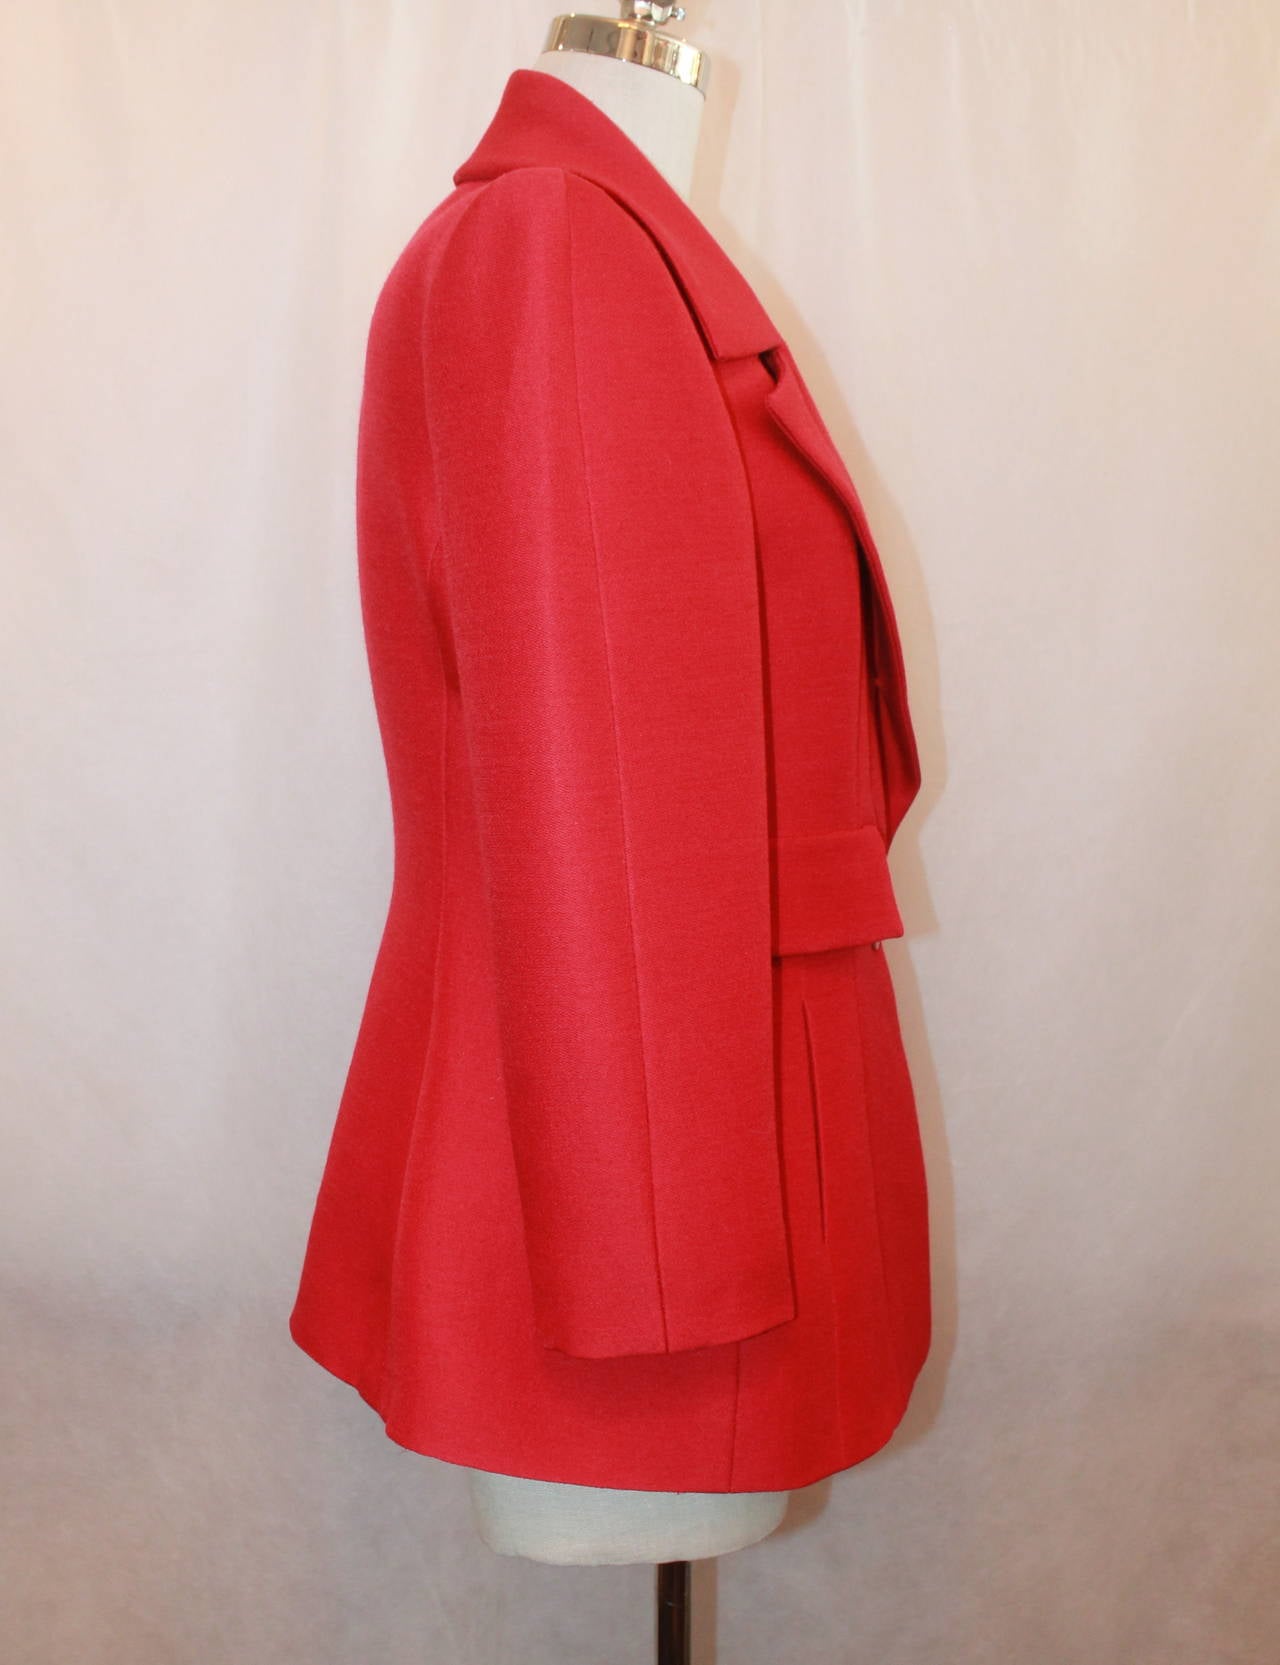 chanel red jacket